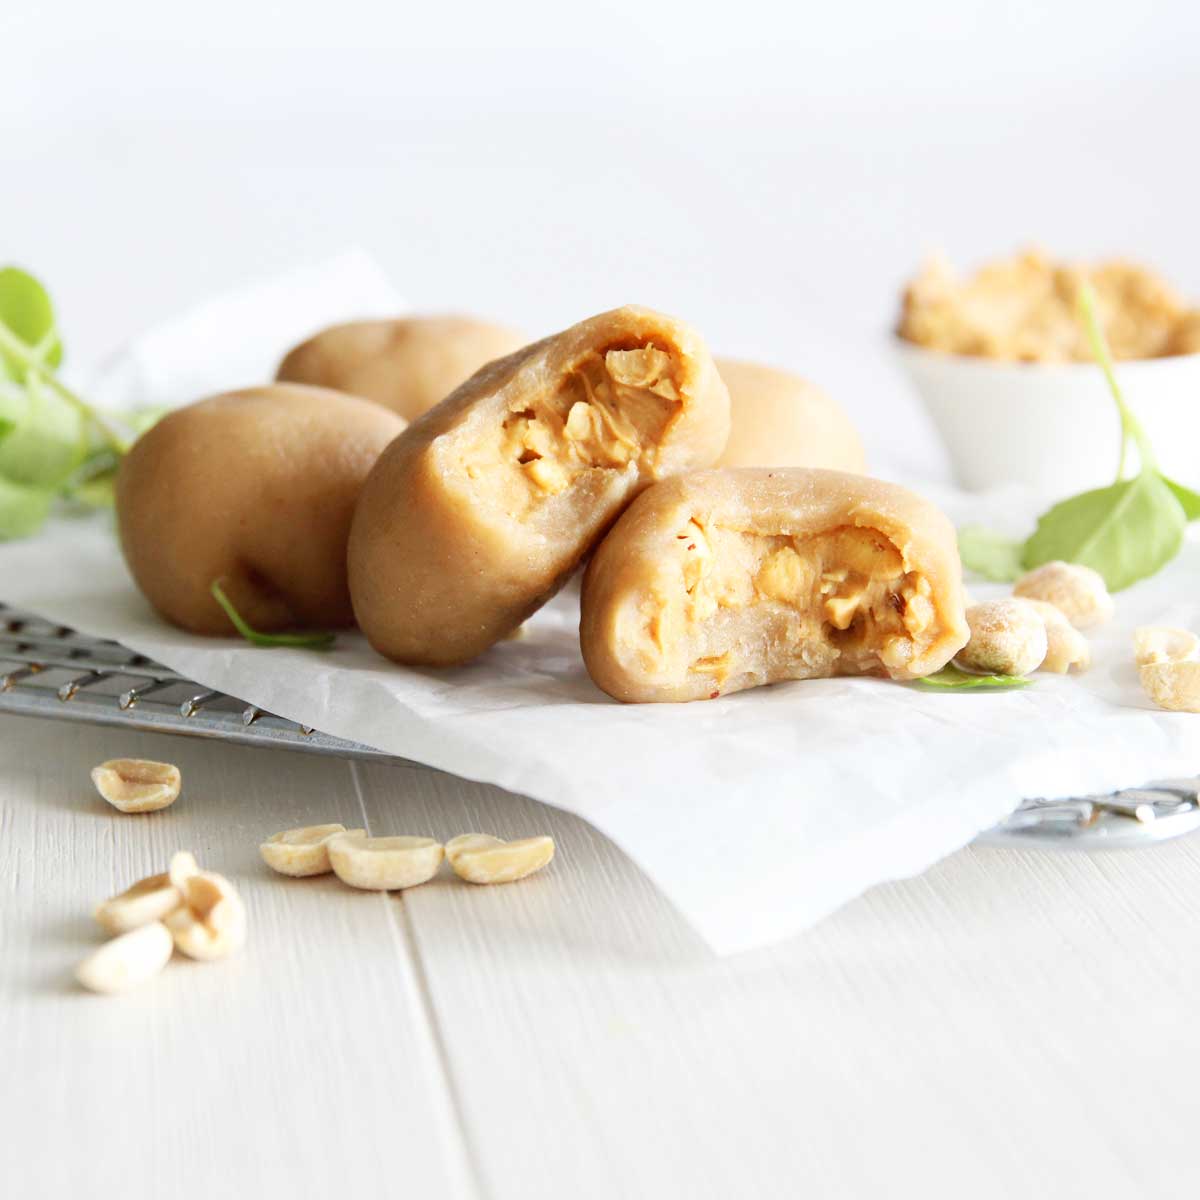 Chinese-Styled Peanut Butter Mochi Made in the Microwave - PB Fit Nice Cream